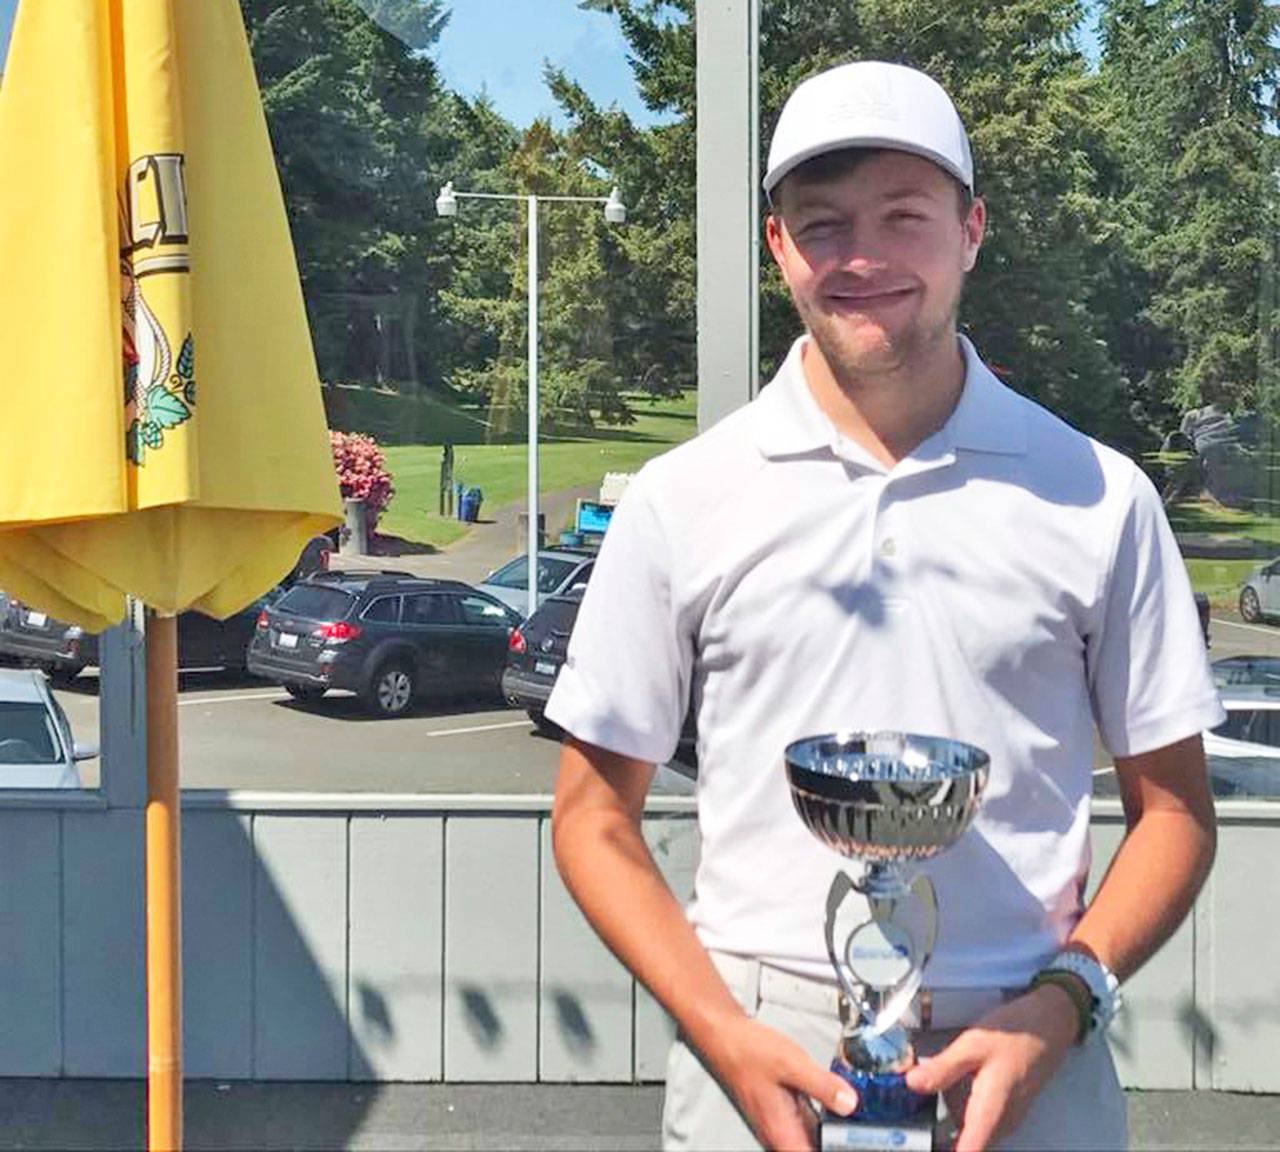 Auburn’s Dallon Bennet took home some hardware at the recent 54 Hole Challenge at North Shore Golf Course in Tacoma. COURTESY PHOTO